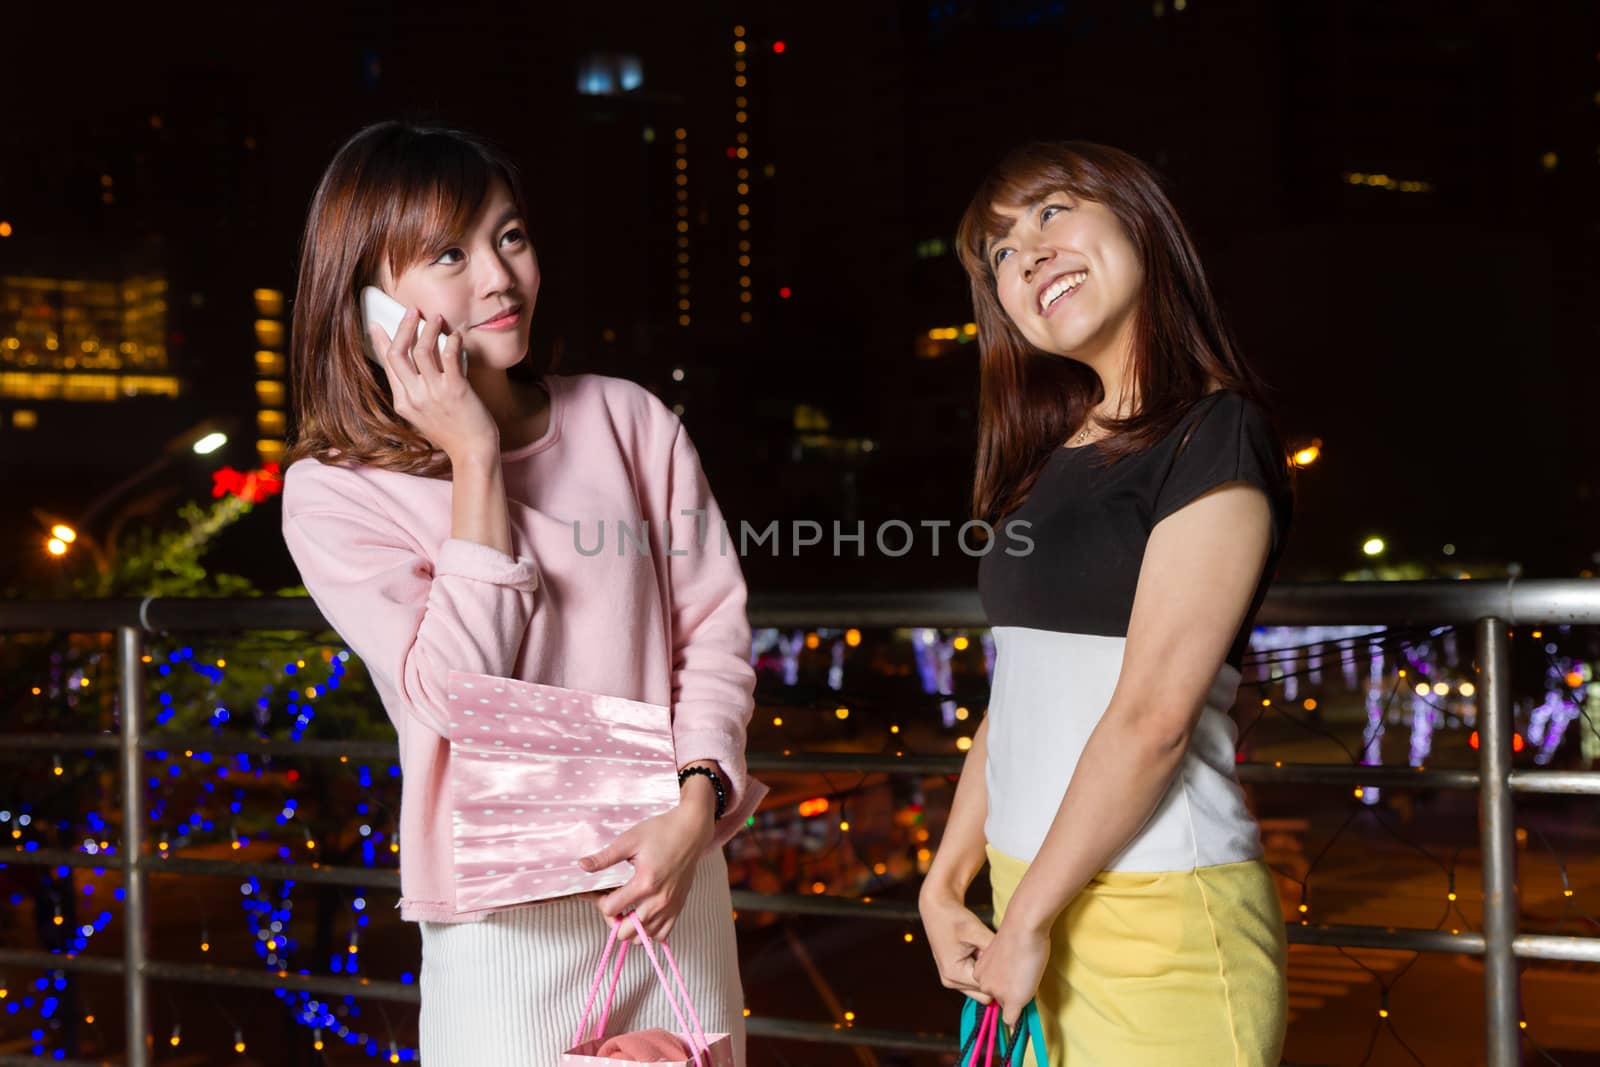 Asian shoppers at night in city by imagesbykenny